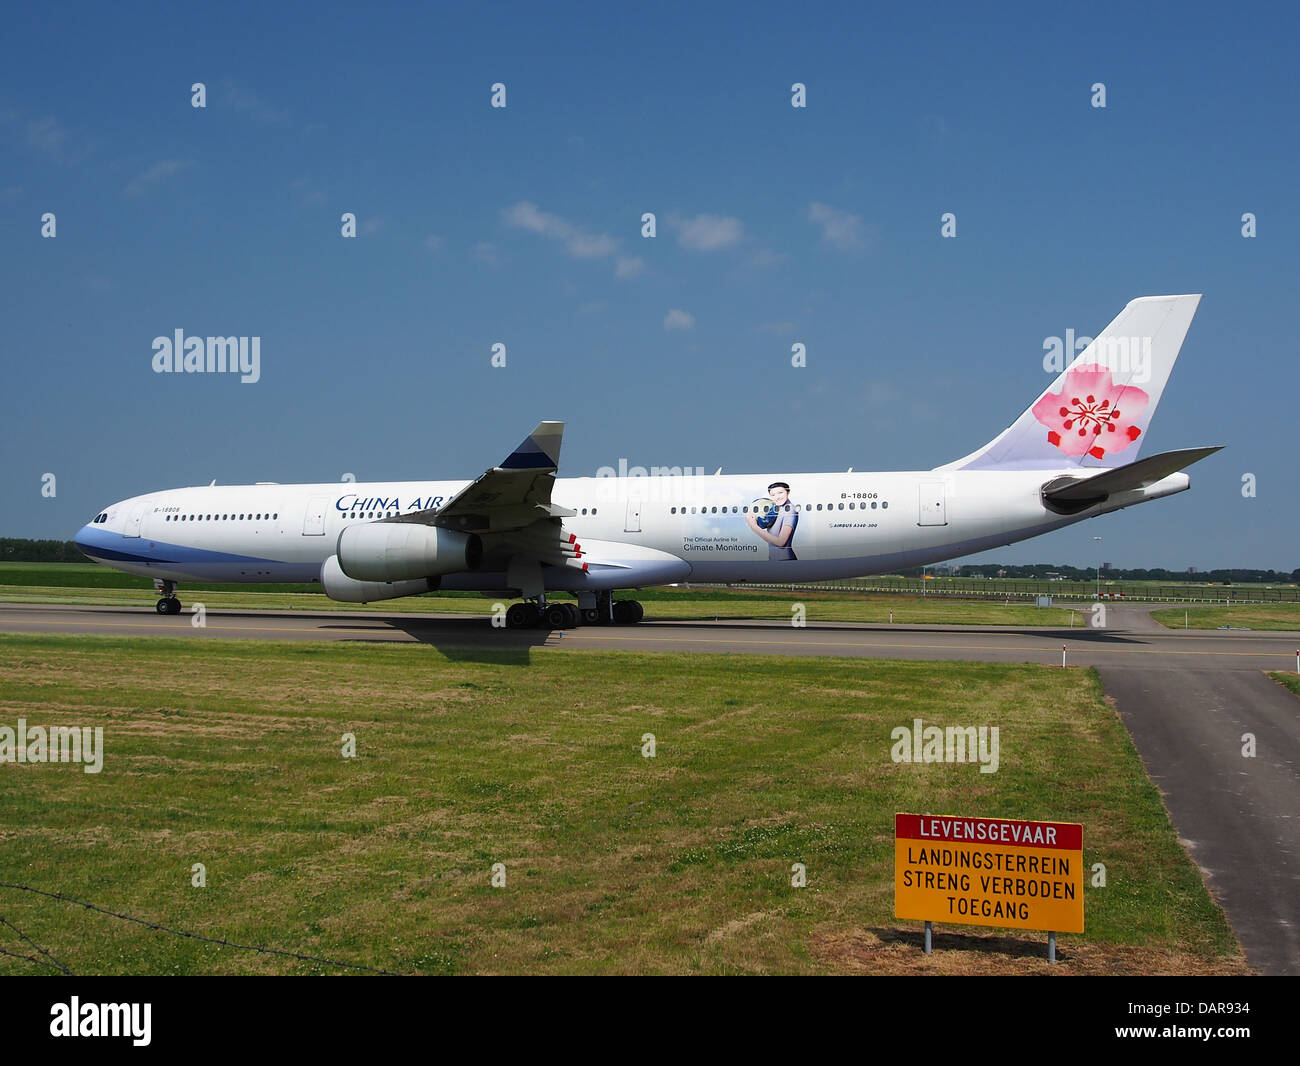 B-18806 China Airlines Airbus A340-313 X - Cn 433 5 Stockfoto